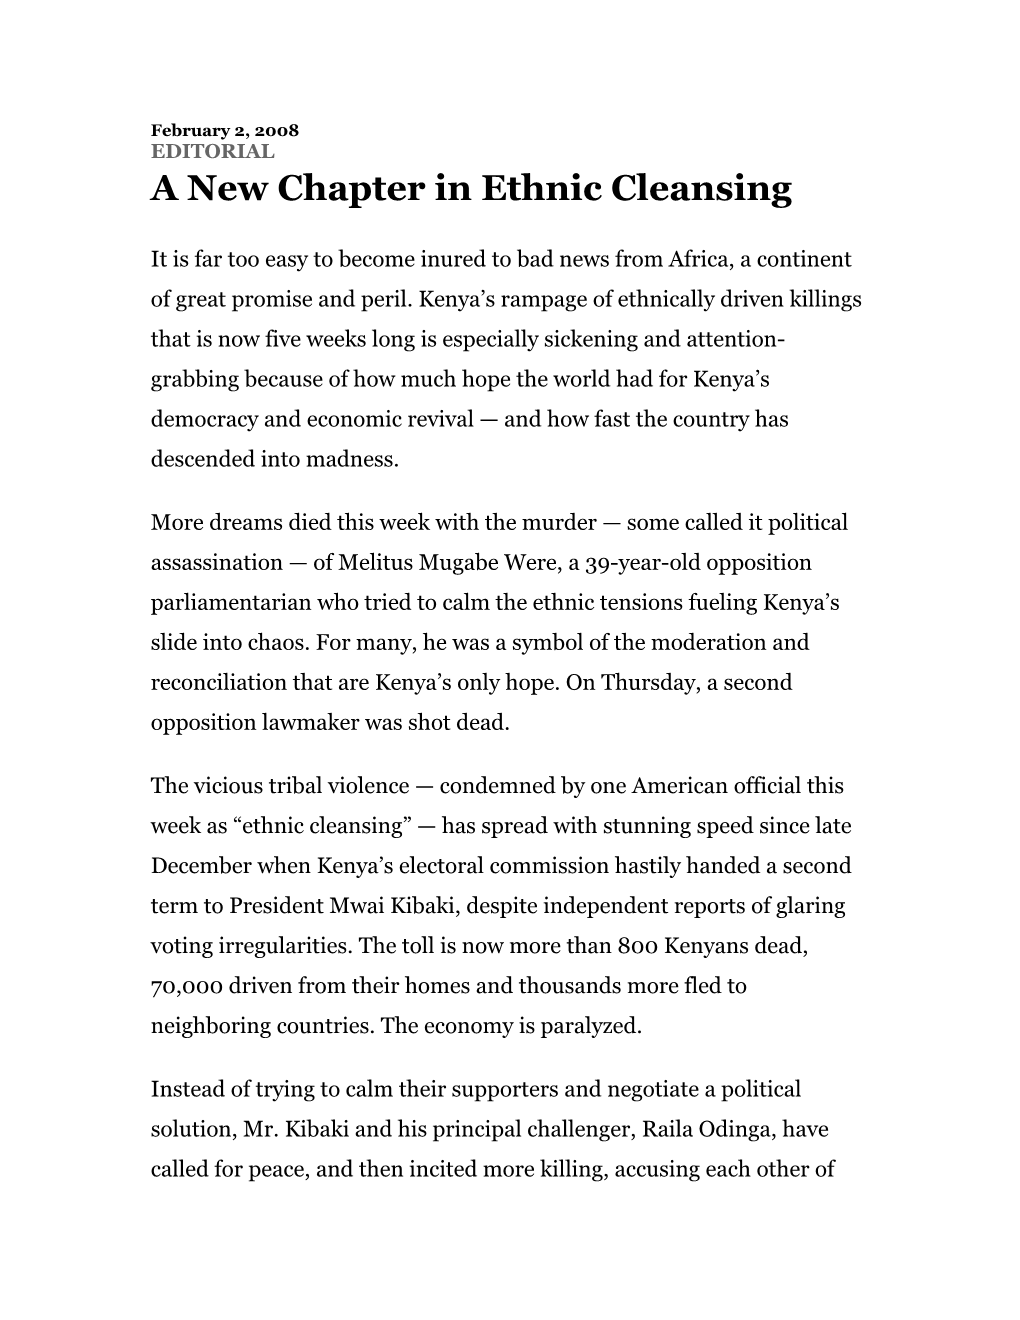 A New Chapter in Ethnic Cleansing